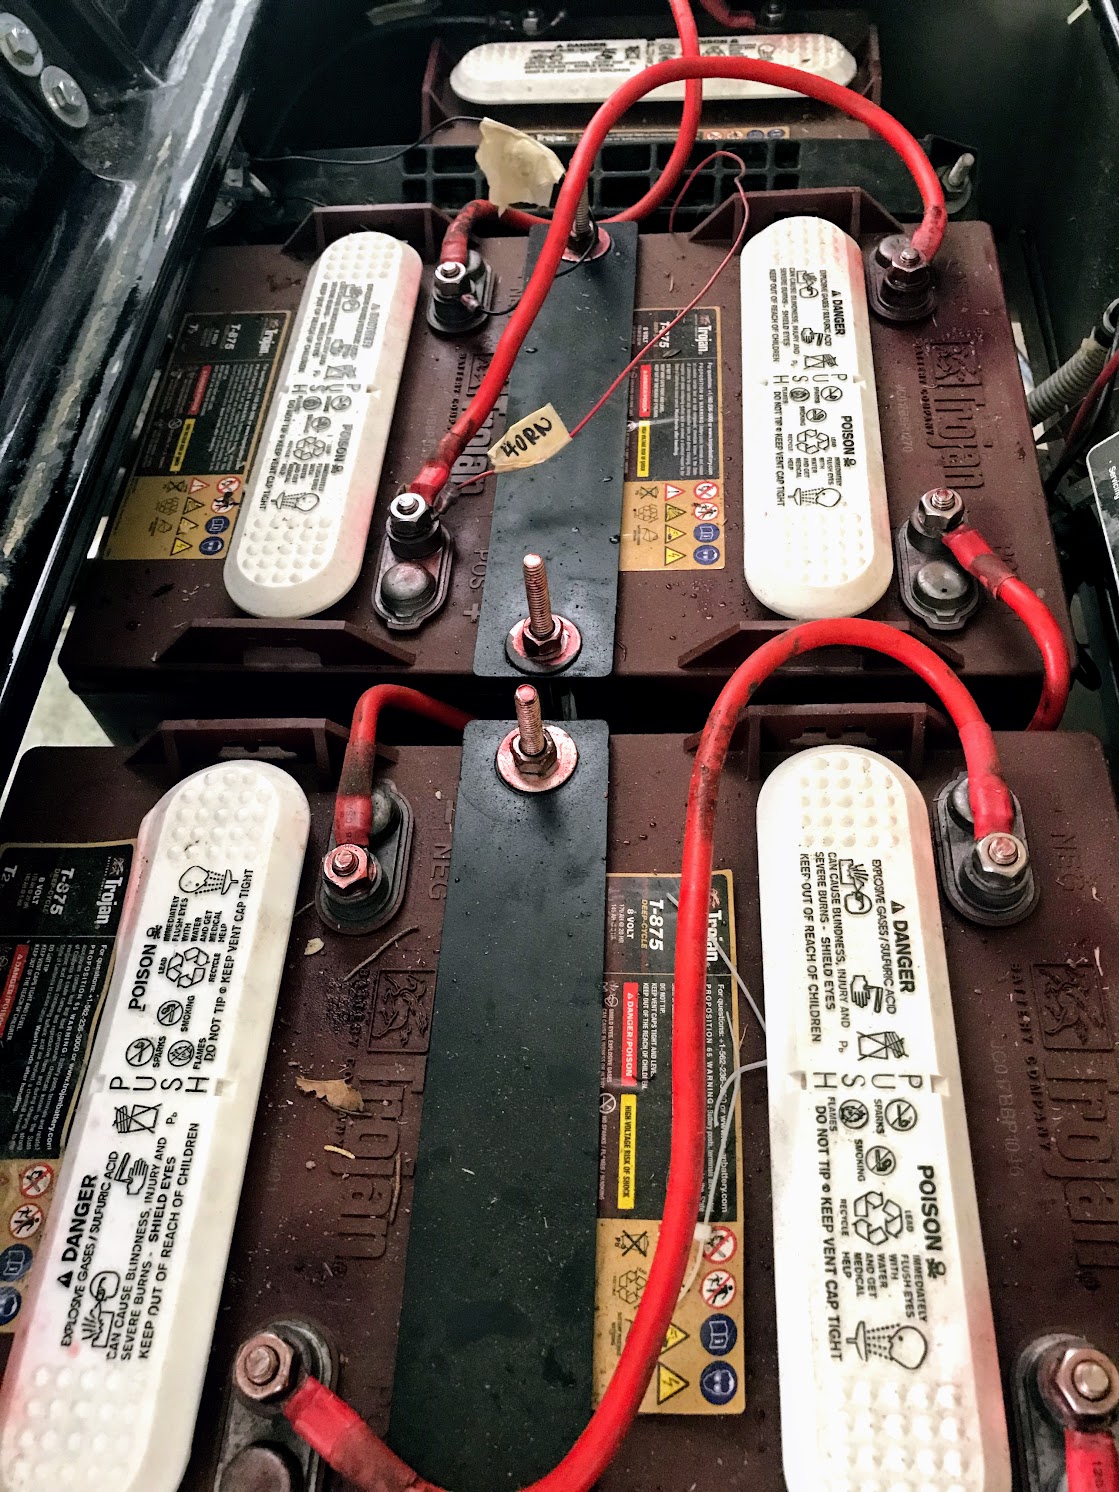 Club Car Battery - Voltage, Maintenance, Makes, and Chargers Motorcycle Ignition Switch Wiring Diagram Golf Carts